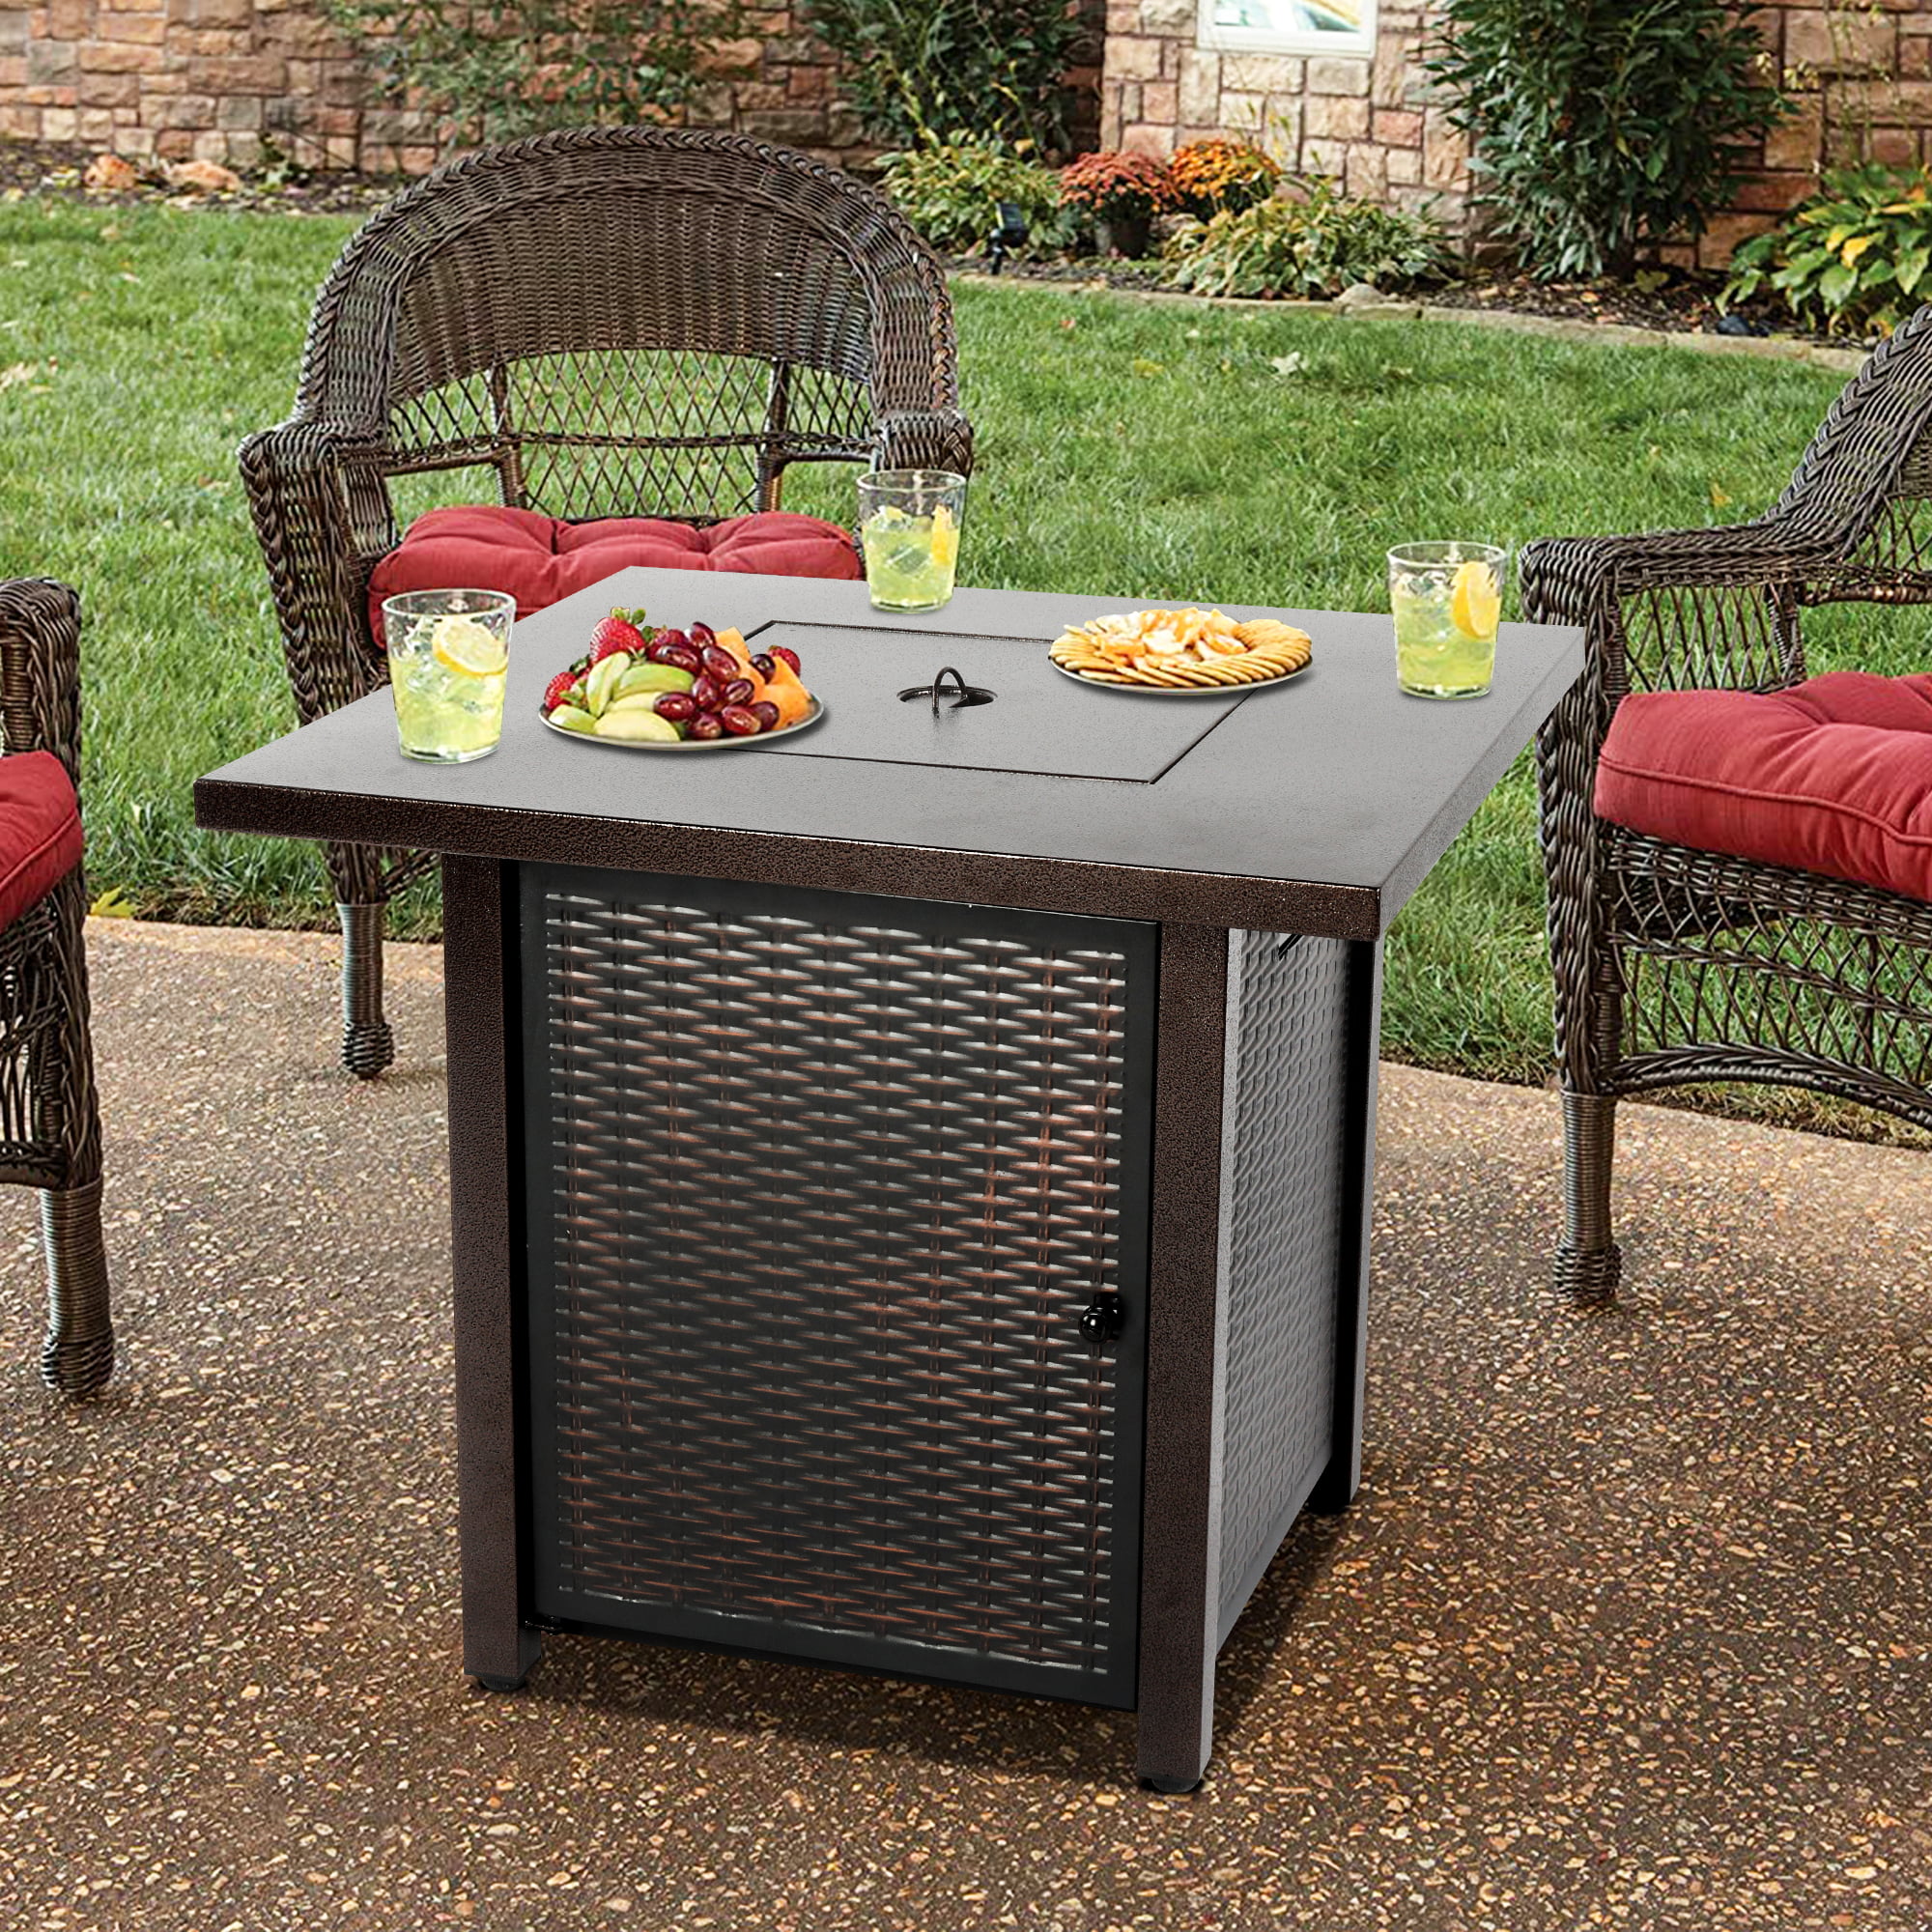 Patio Deck Propane Gas Fire Pit Table, Is It Safe To Have A Gas Fire Pit On Deck